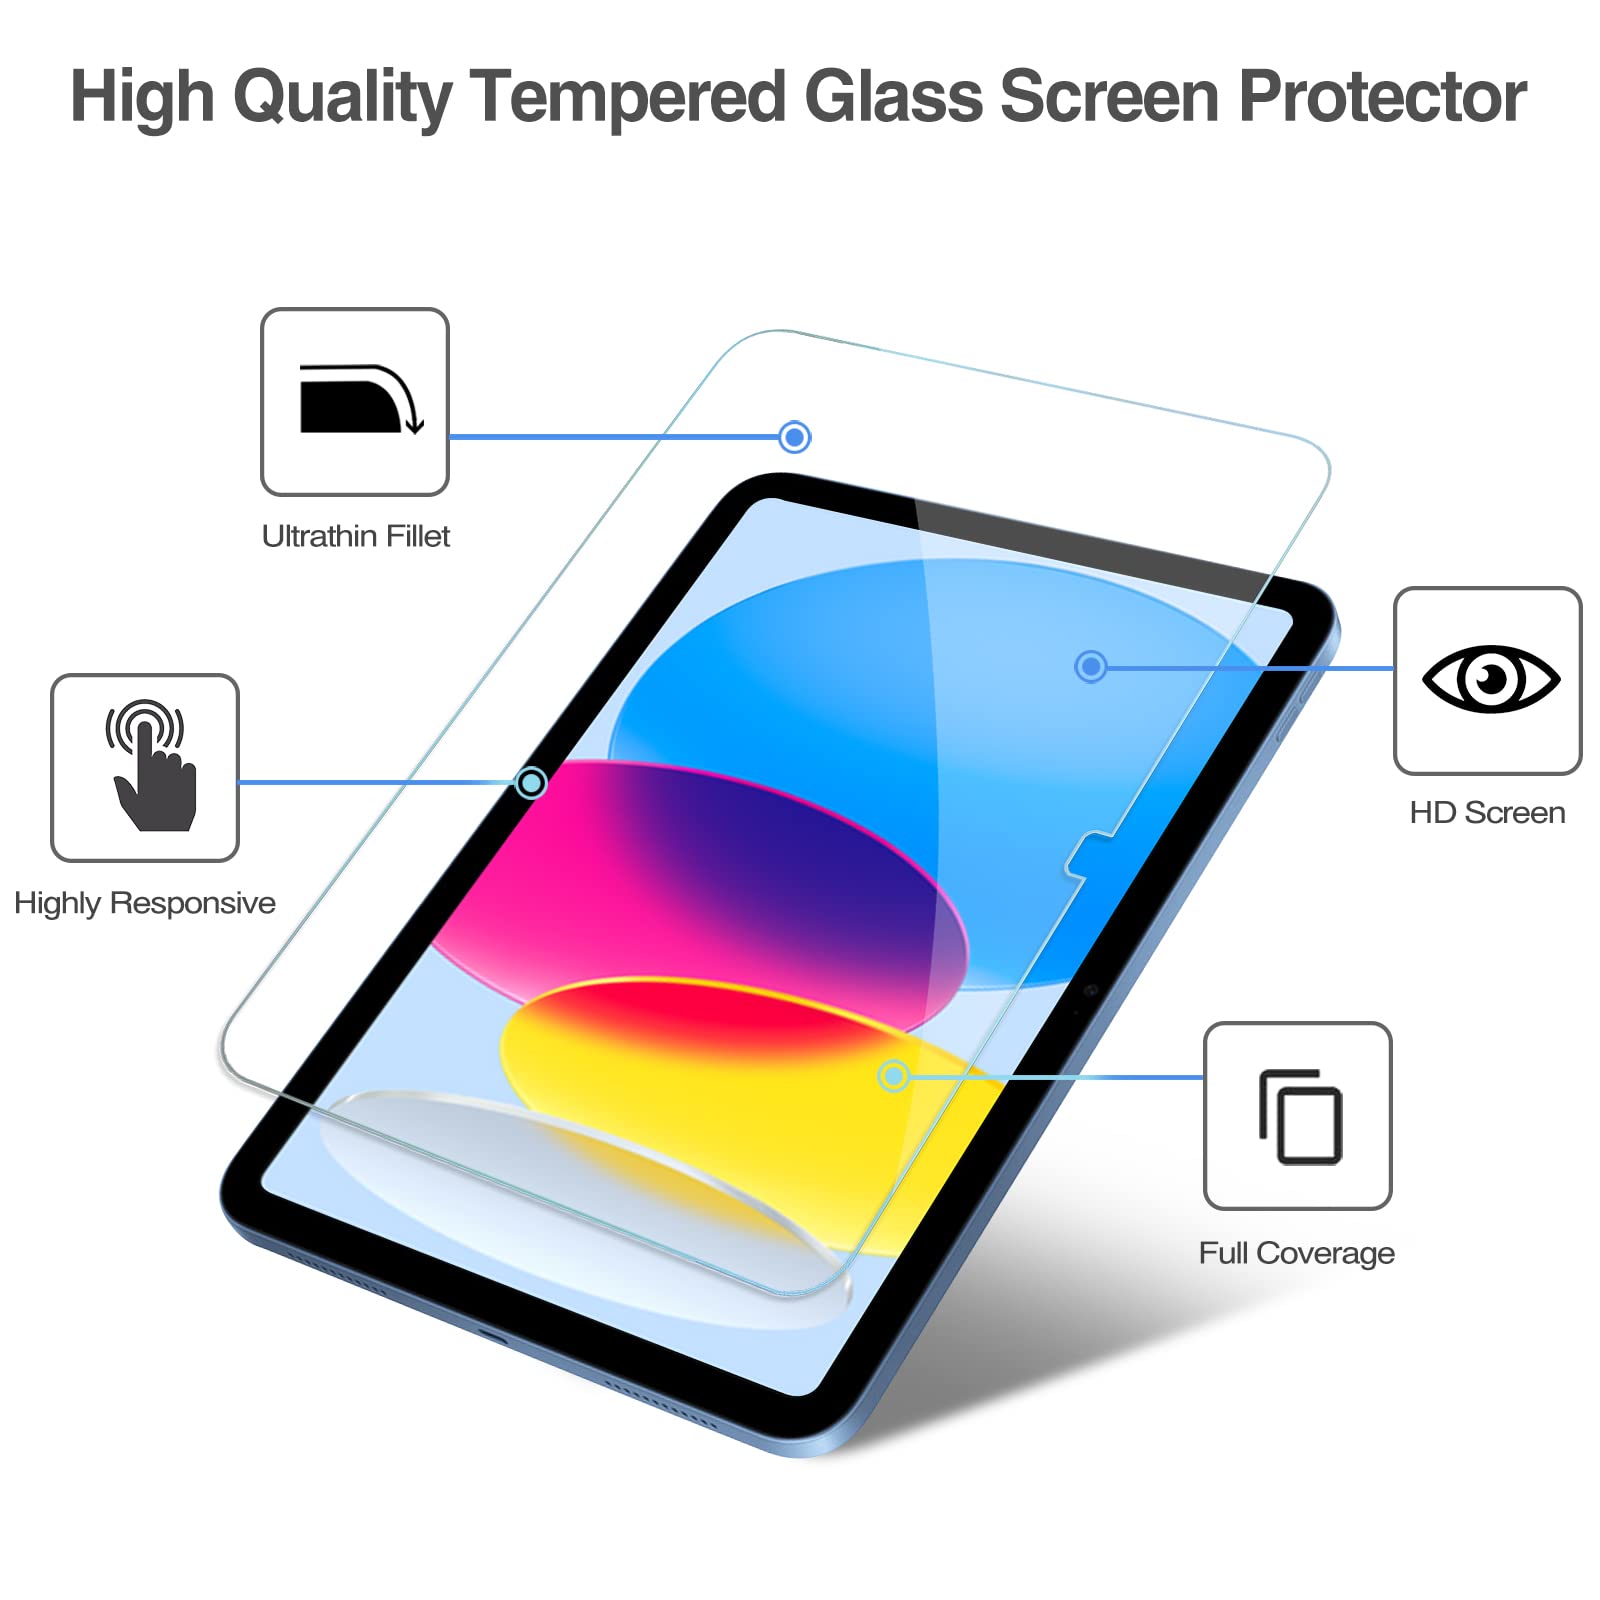 ProCase 1 Piece Screen Protector for iPad 10th Generation 10.9 Inch 2022, 9H Tempered Glass for iPad 10th Screen Protector Film Protective Glass Screen Protector - Clear